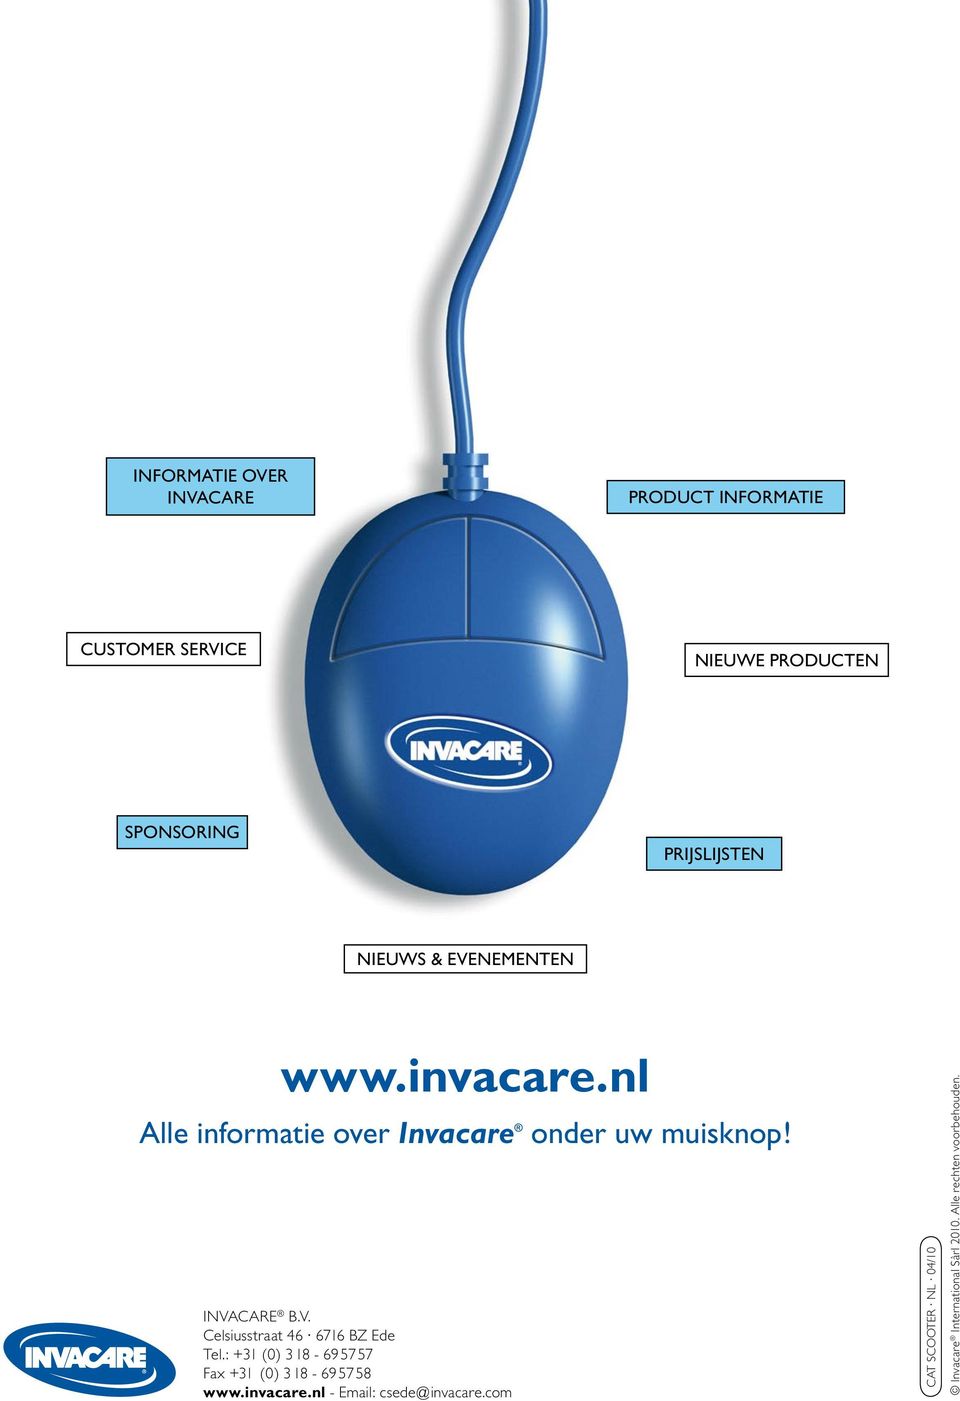 : +31 (0) 3 18-69 57 57 Fax +31 (0) 3 18-69 57 58 www.invacare.nl - Email: csede@invacare.